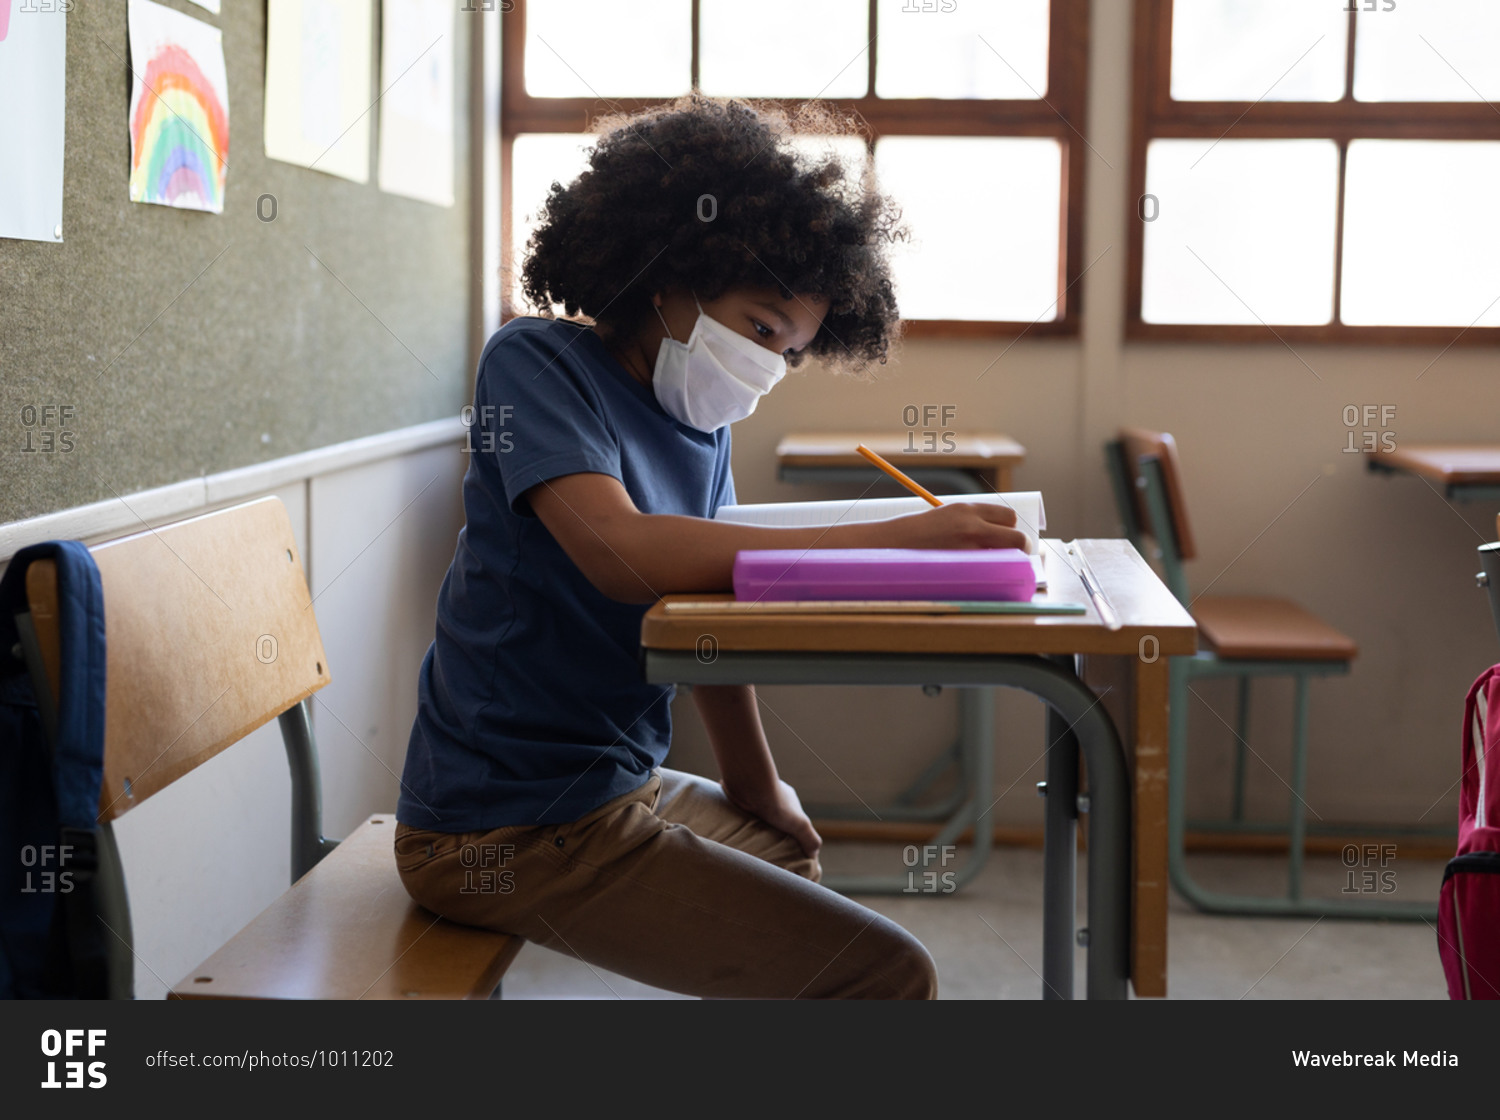 Mixed race boy sitting at desk wearing face mask in classroom. Primary education social distancing health safety during Covid19 Coronavirus pandemic.